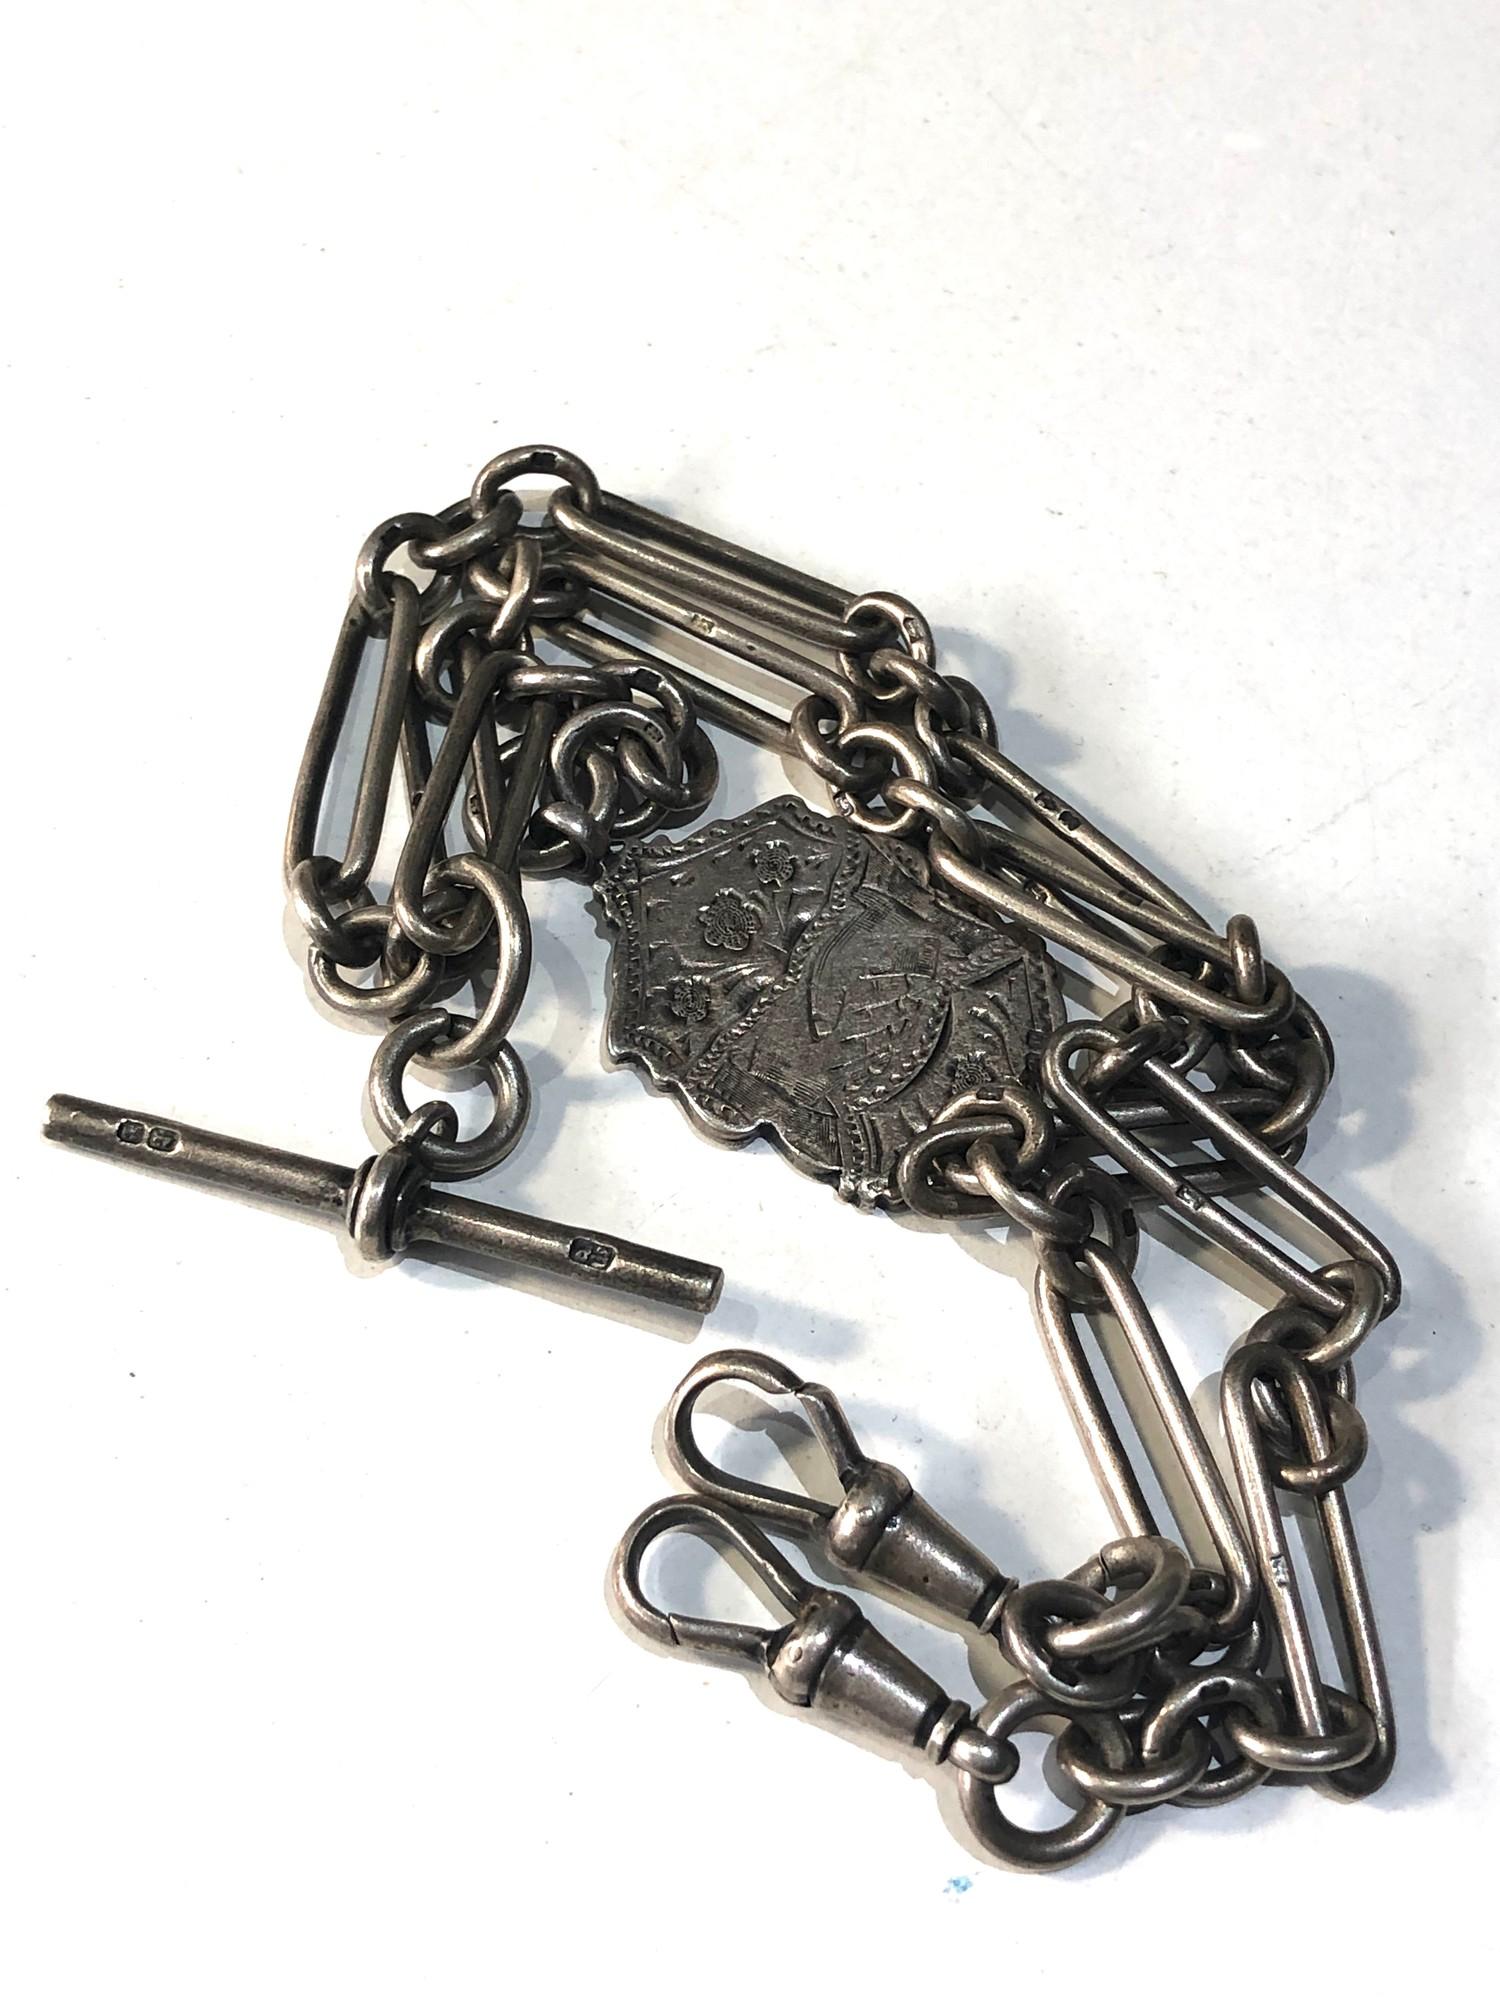 Antique fancy link silver double Albert watch chain and fob weight 45g - Image 2 of 4